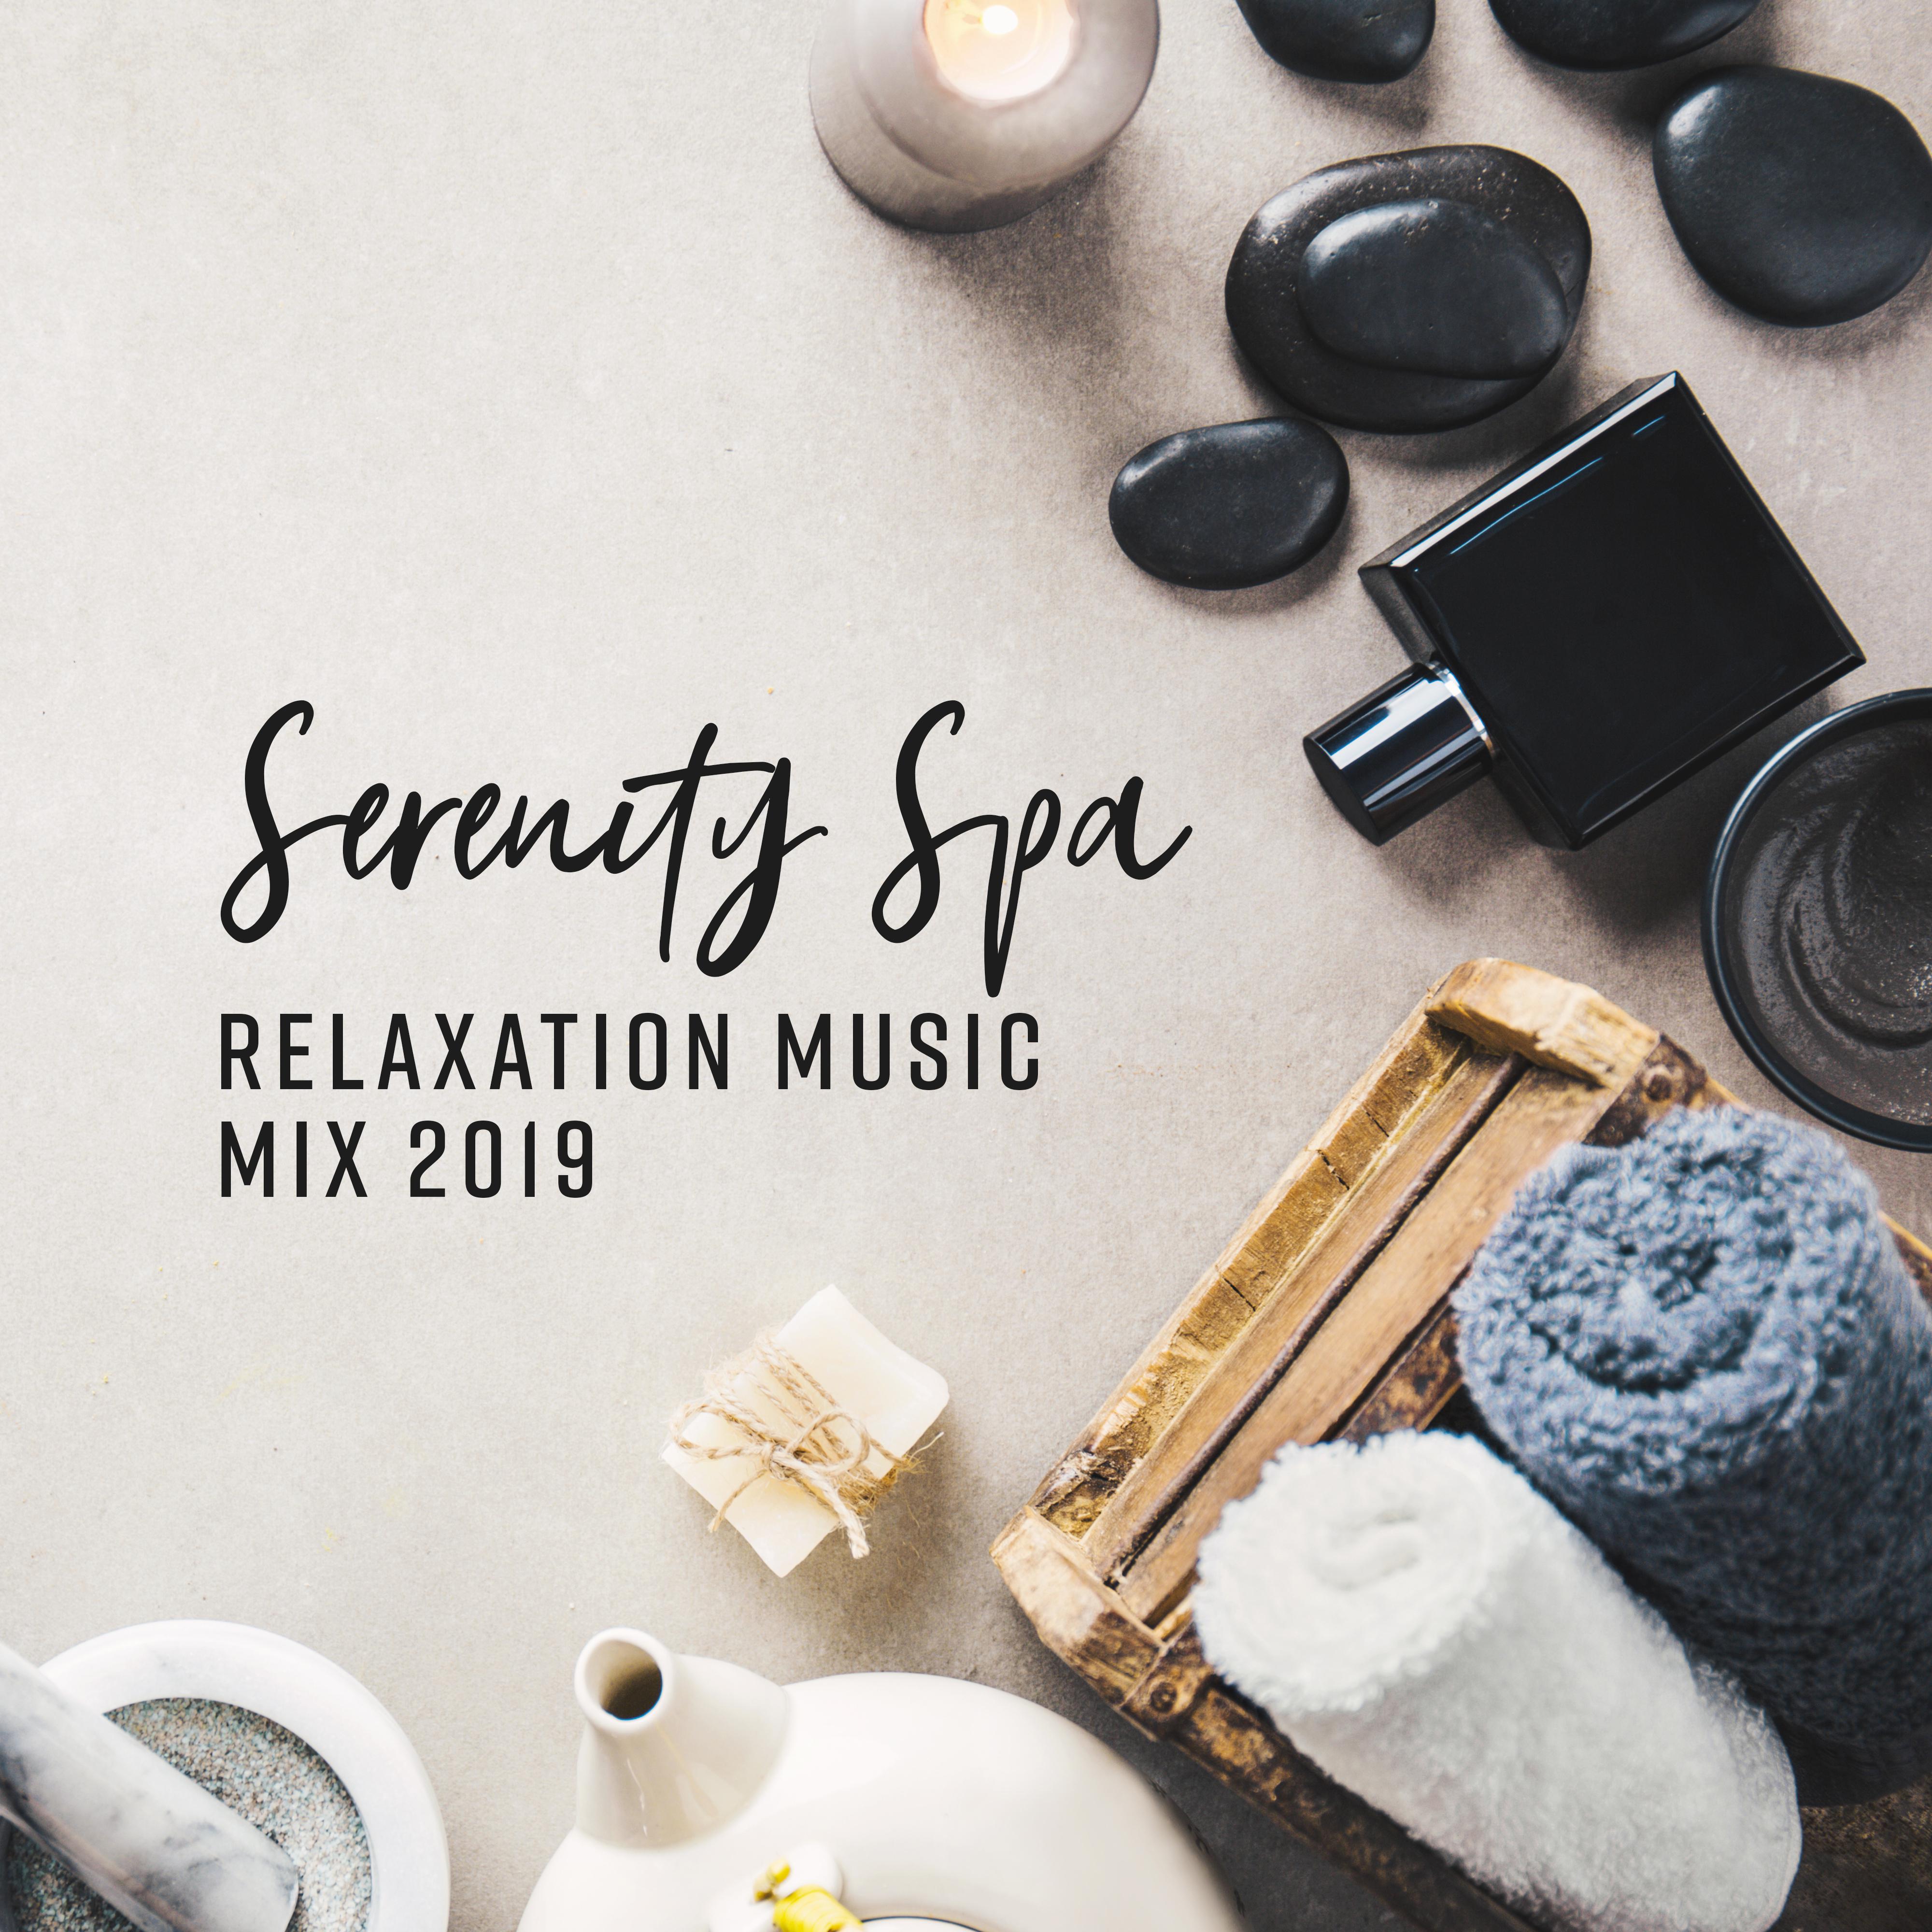 Serenity Spa Relaxation Music Mix 2019